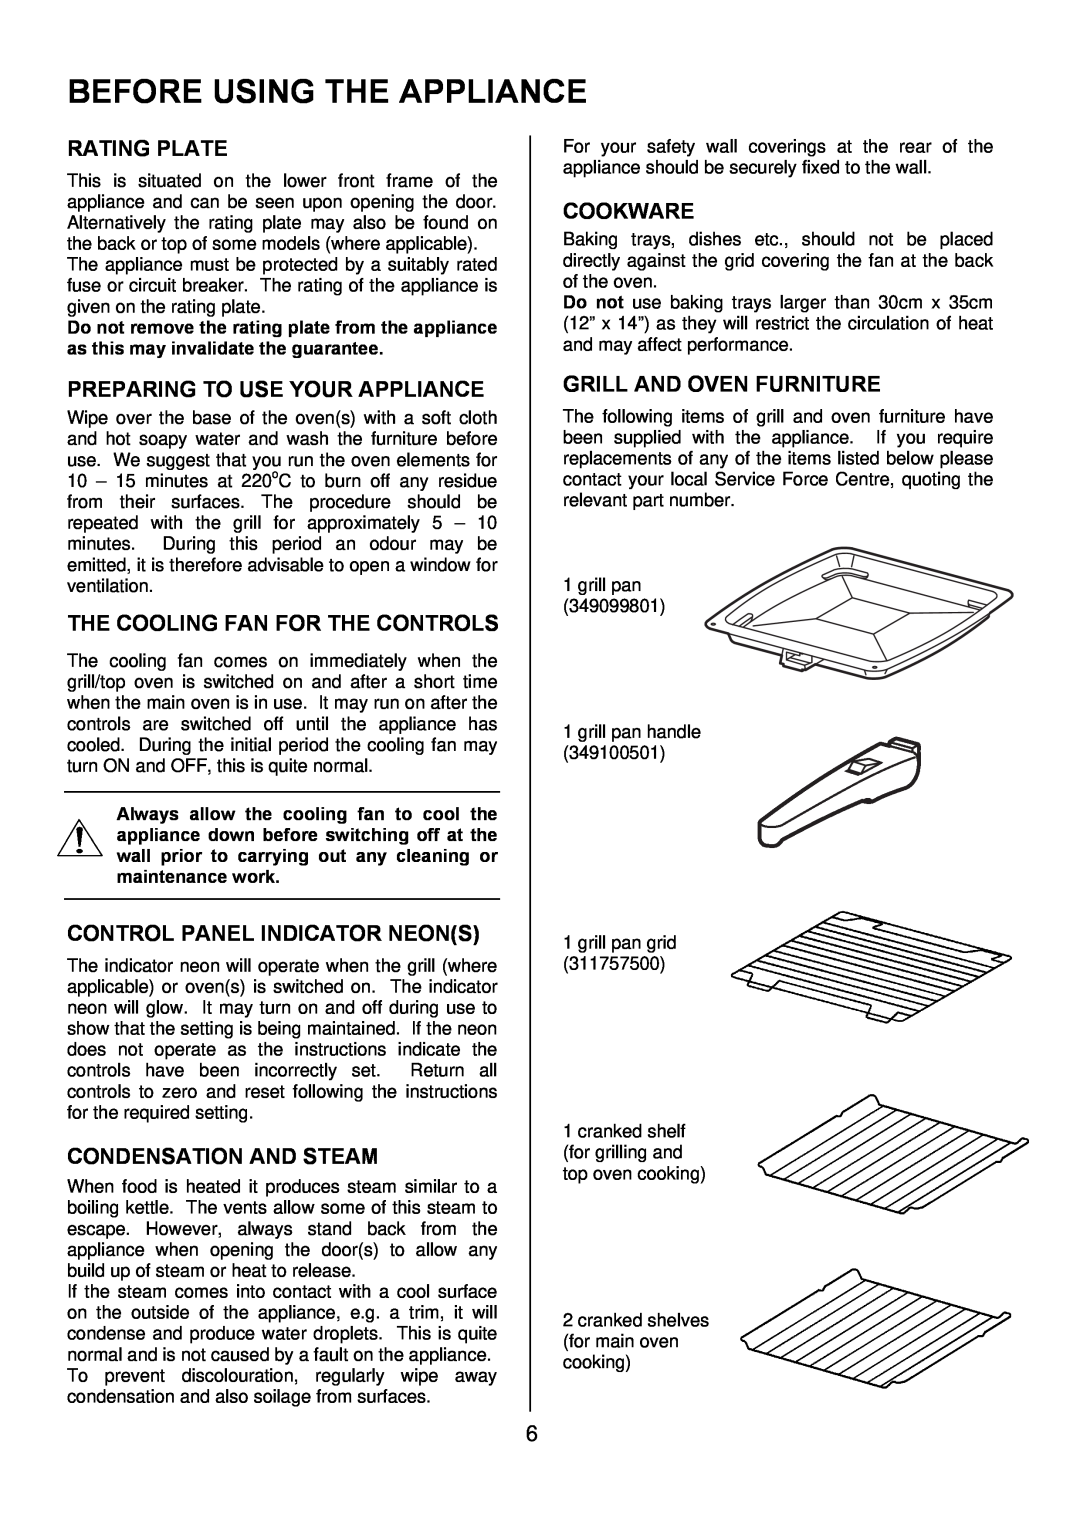 Electrolux EKC6045 manual Before Using The Appliance, Rating Plate, Preparing To Use Your Appliance, Condensation And Steam 